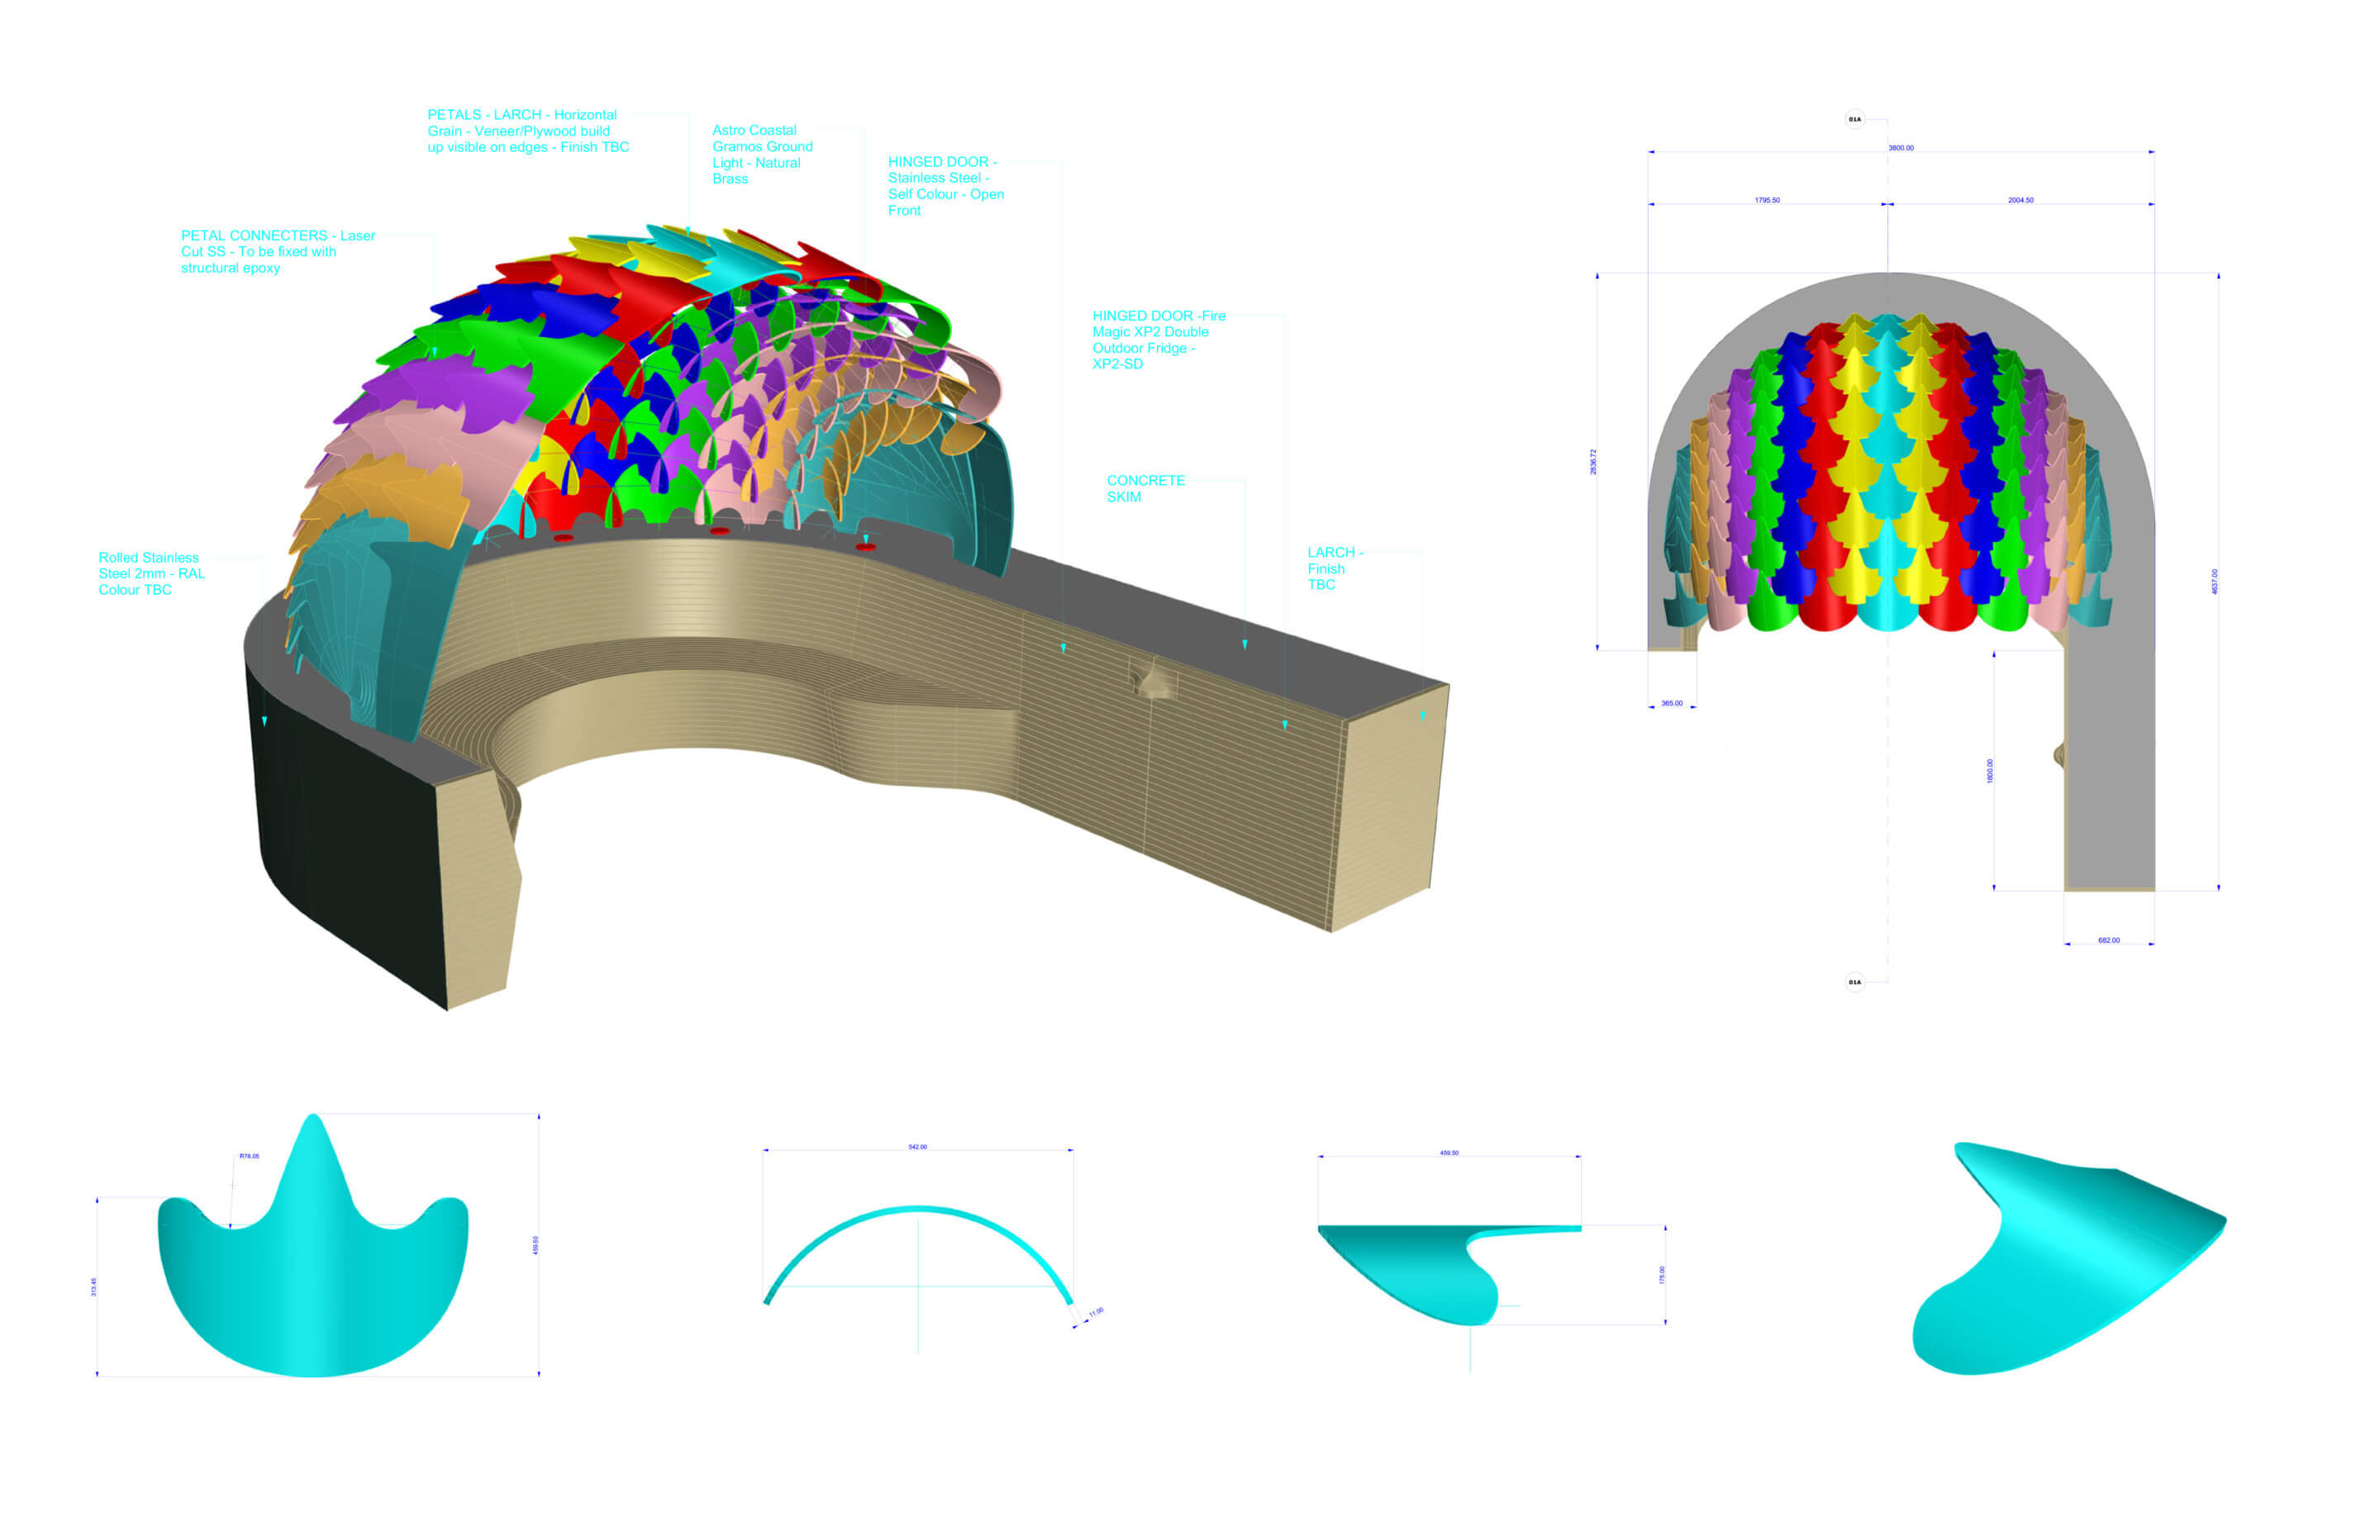 Digital fabrication plan of a curved timber pavilion